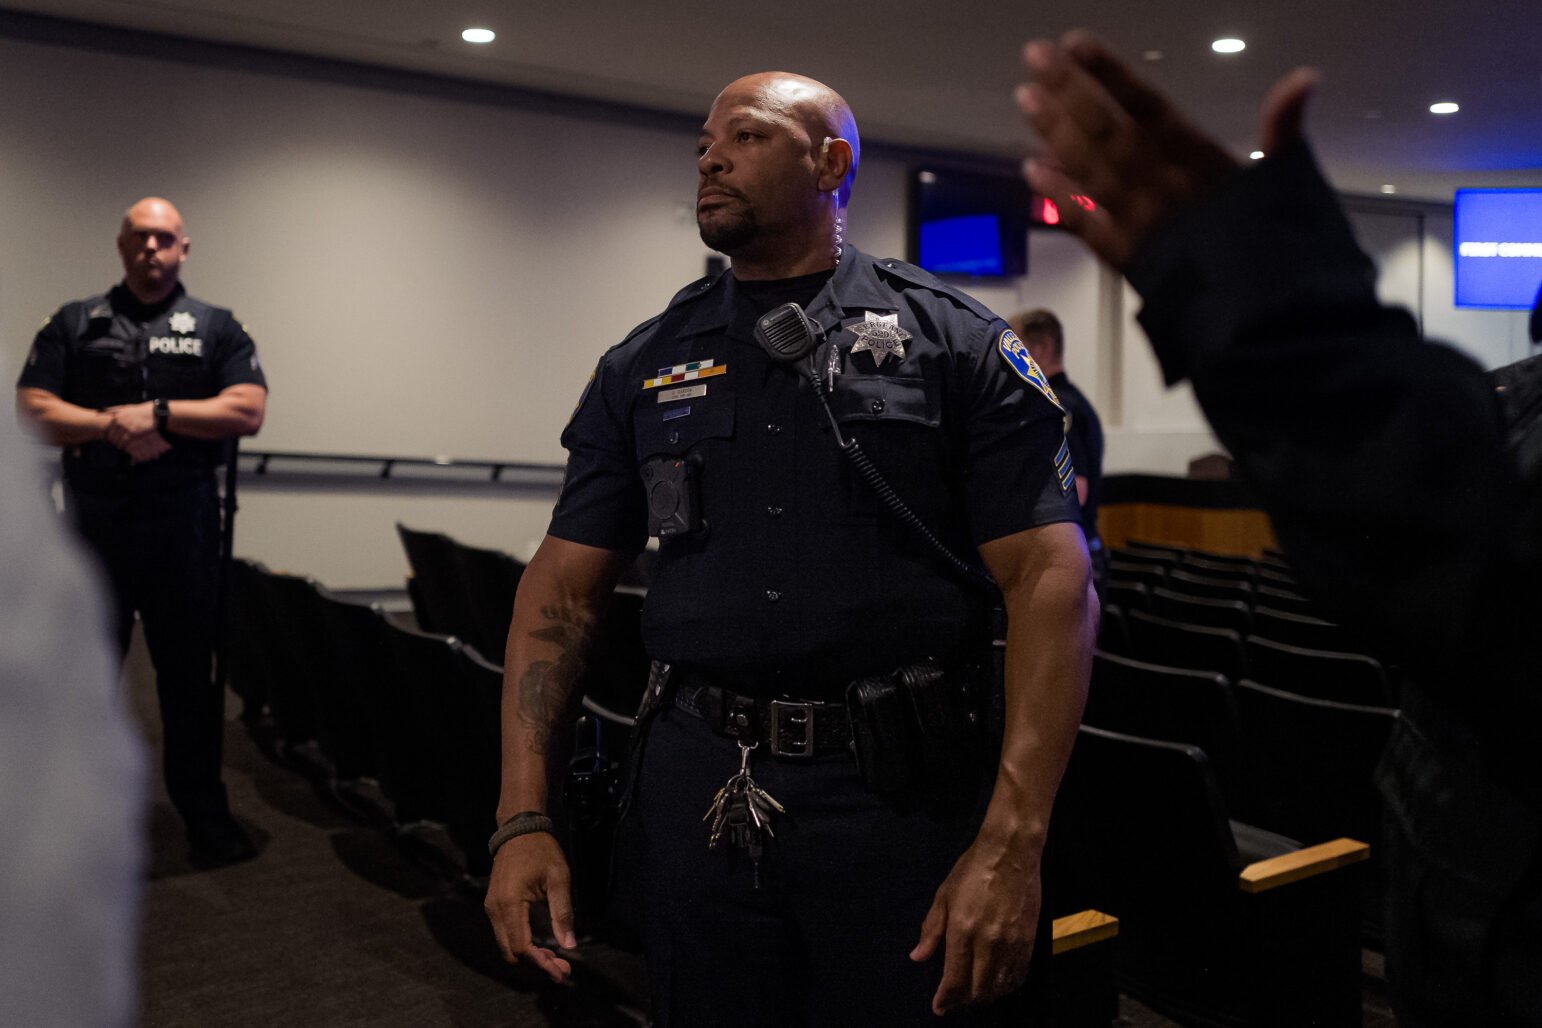 Vallejo Police Ofc. Steve Darden stands in the aisle of the Vallejo City Council chambers, which is nearly empty after police ejected demonstrators and other members of the community.